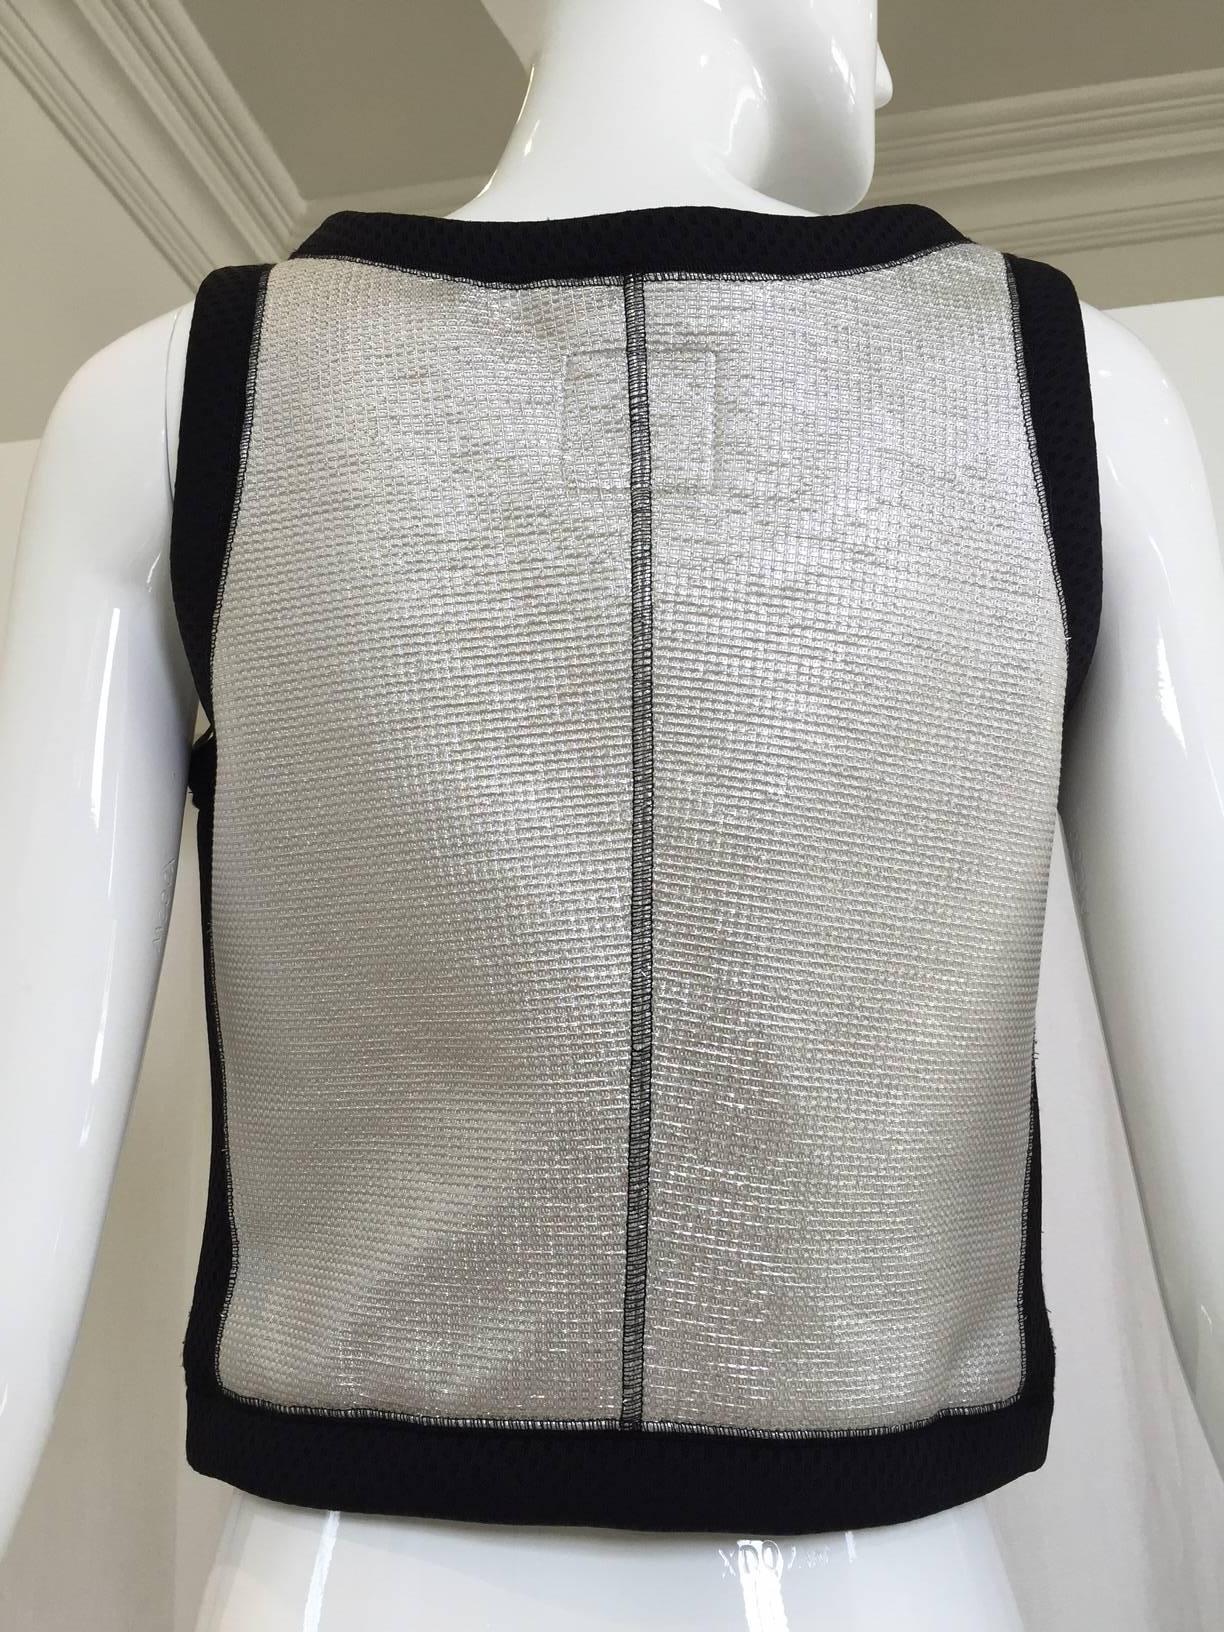 Vintage 1990S CHANEL silver and black sporty vest/ top
Bust: 34